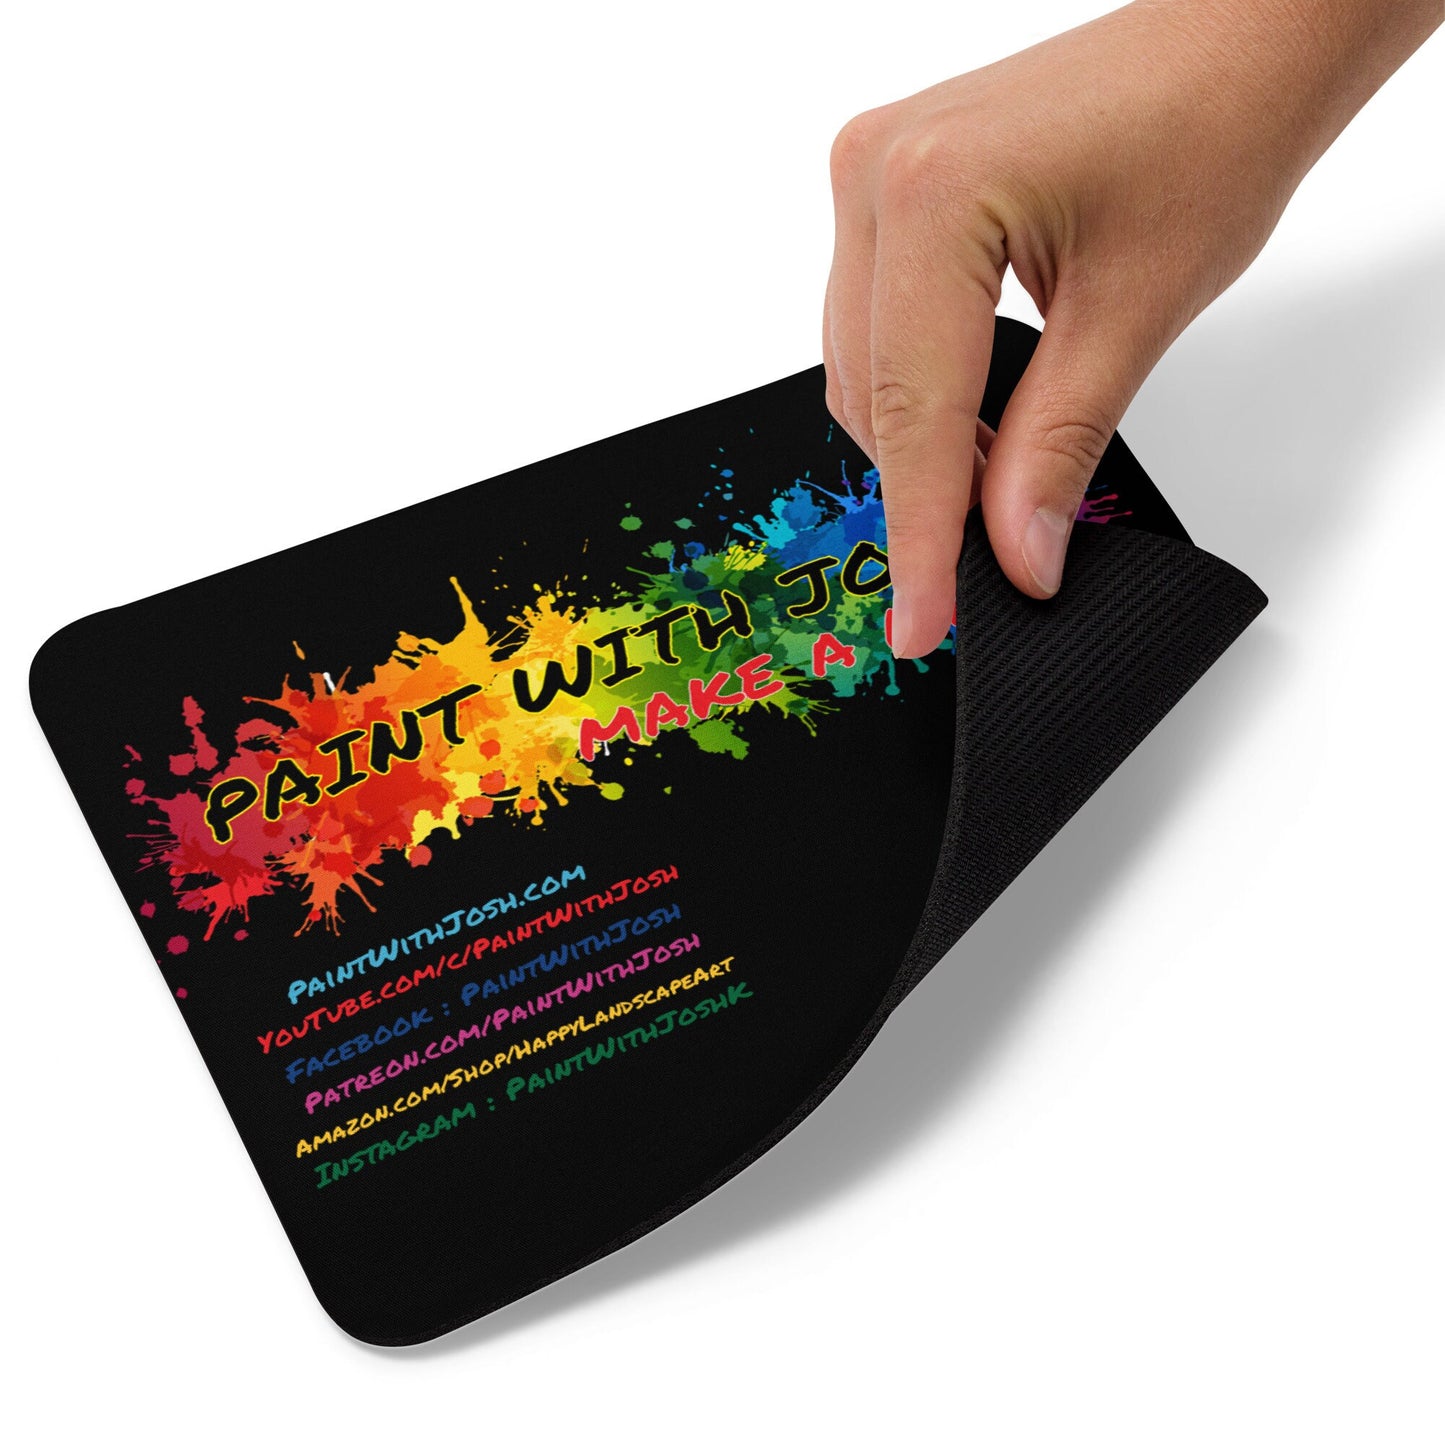 Paint With Josh Logo Mouse Pad with Web Pages. Computer Mouse Pad by PWJ Artist Josh Kirkham